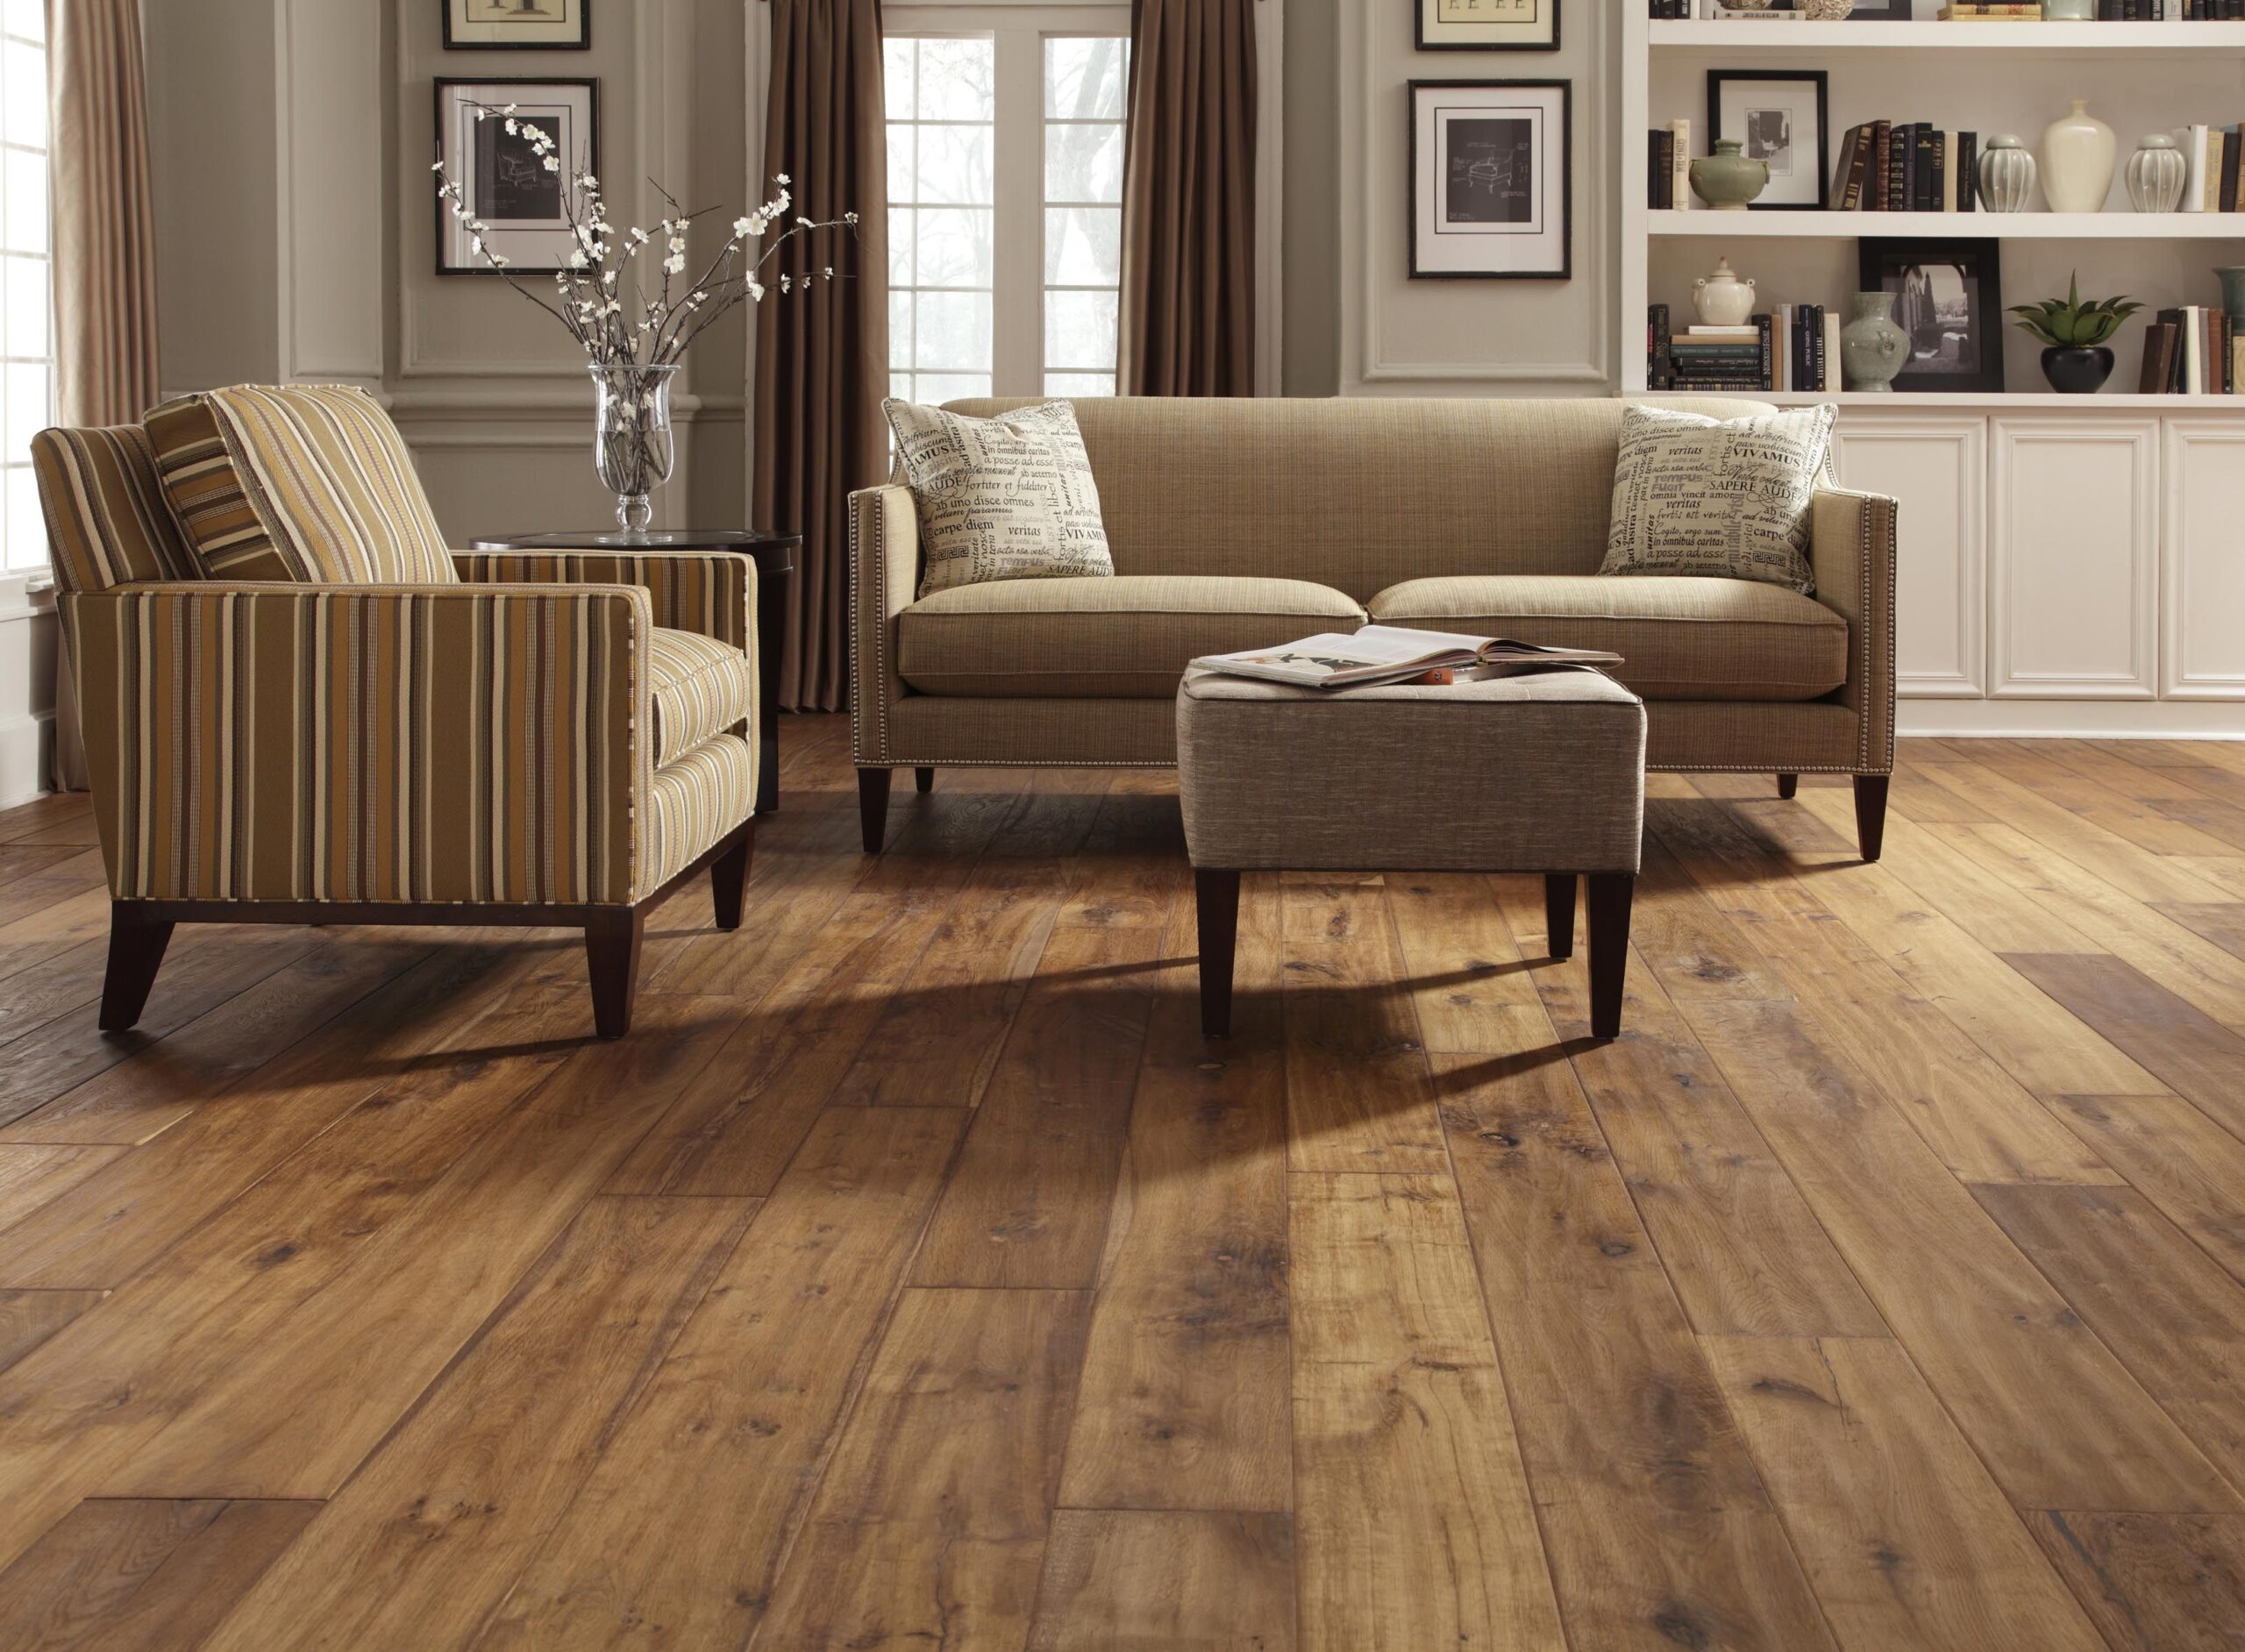 5 Best Laminate Flooring Colours For, What Is The Best Looking Laminate Flooring